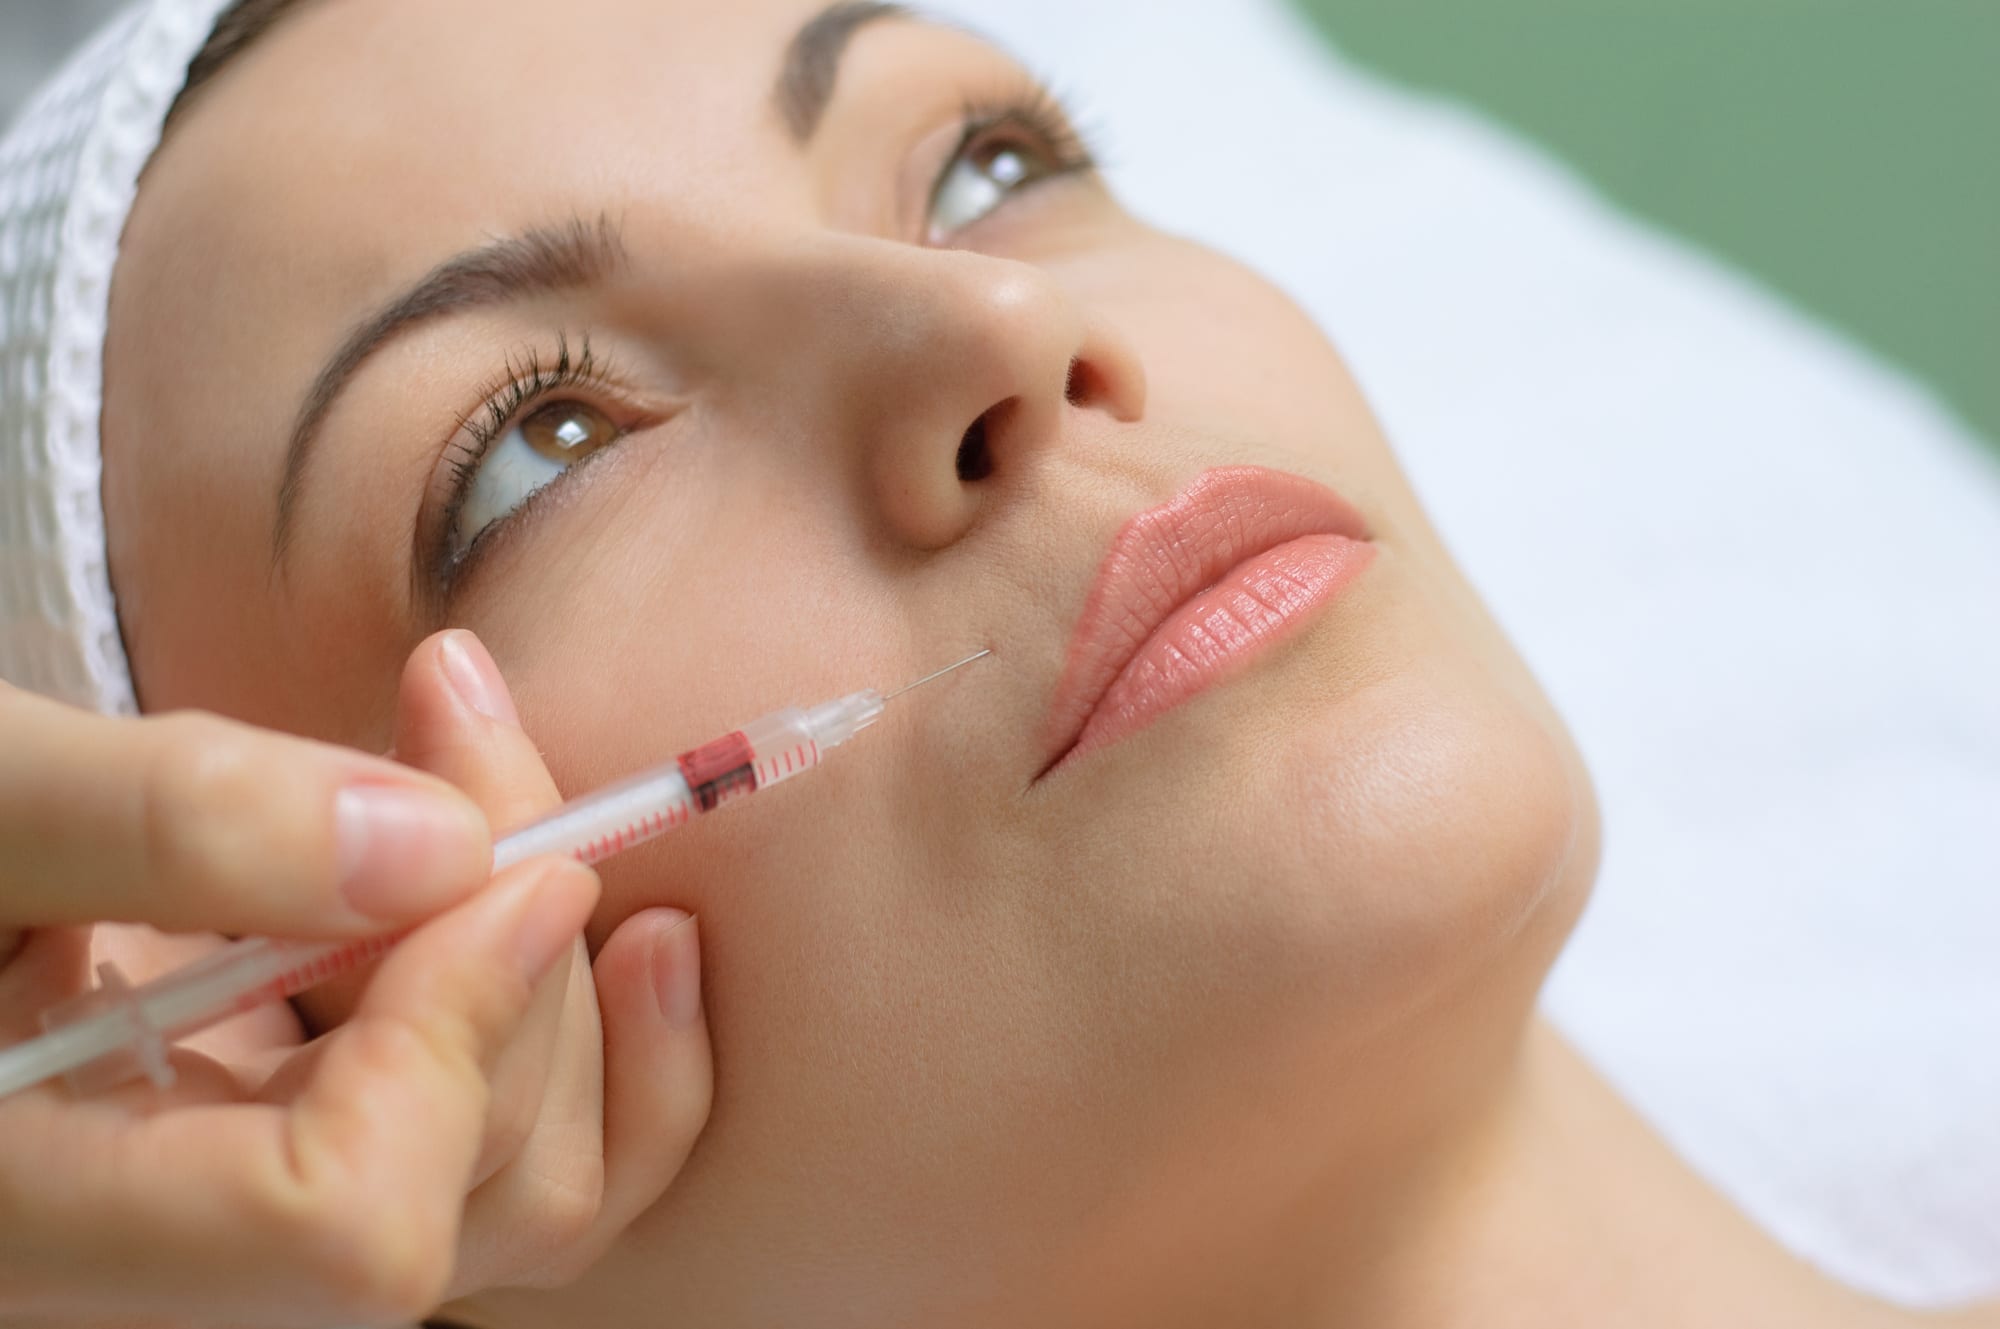 botox injection into upper lip using small syringe with thin needle